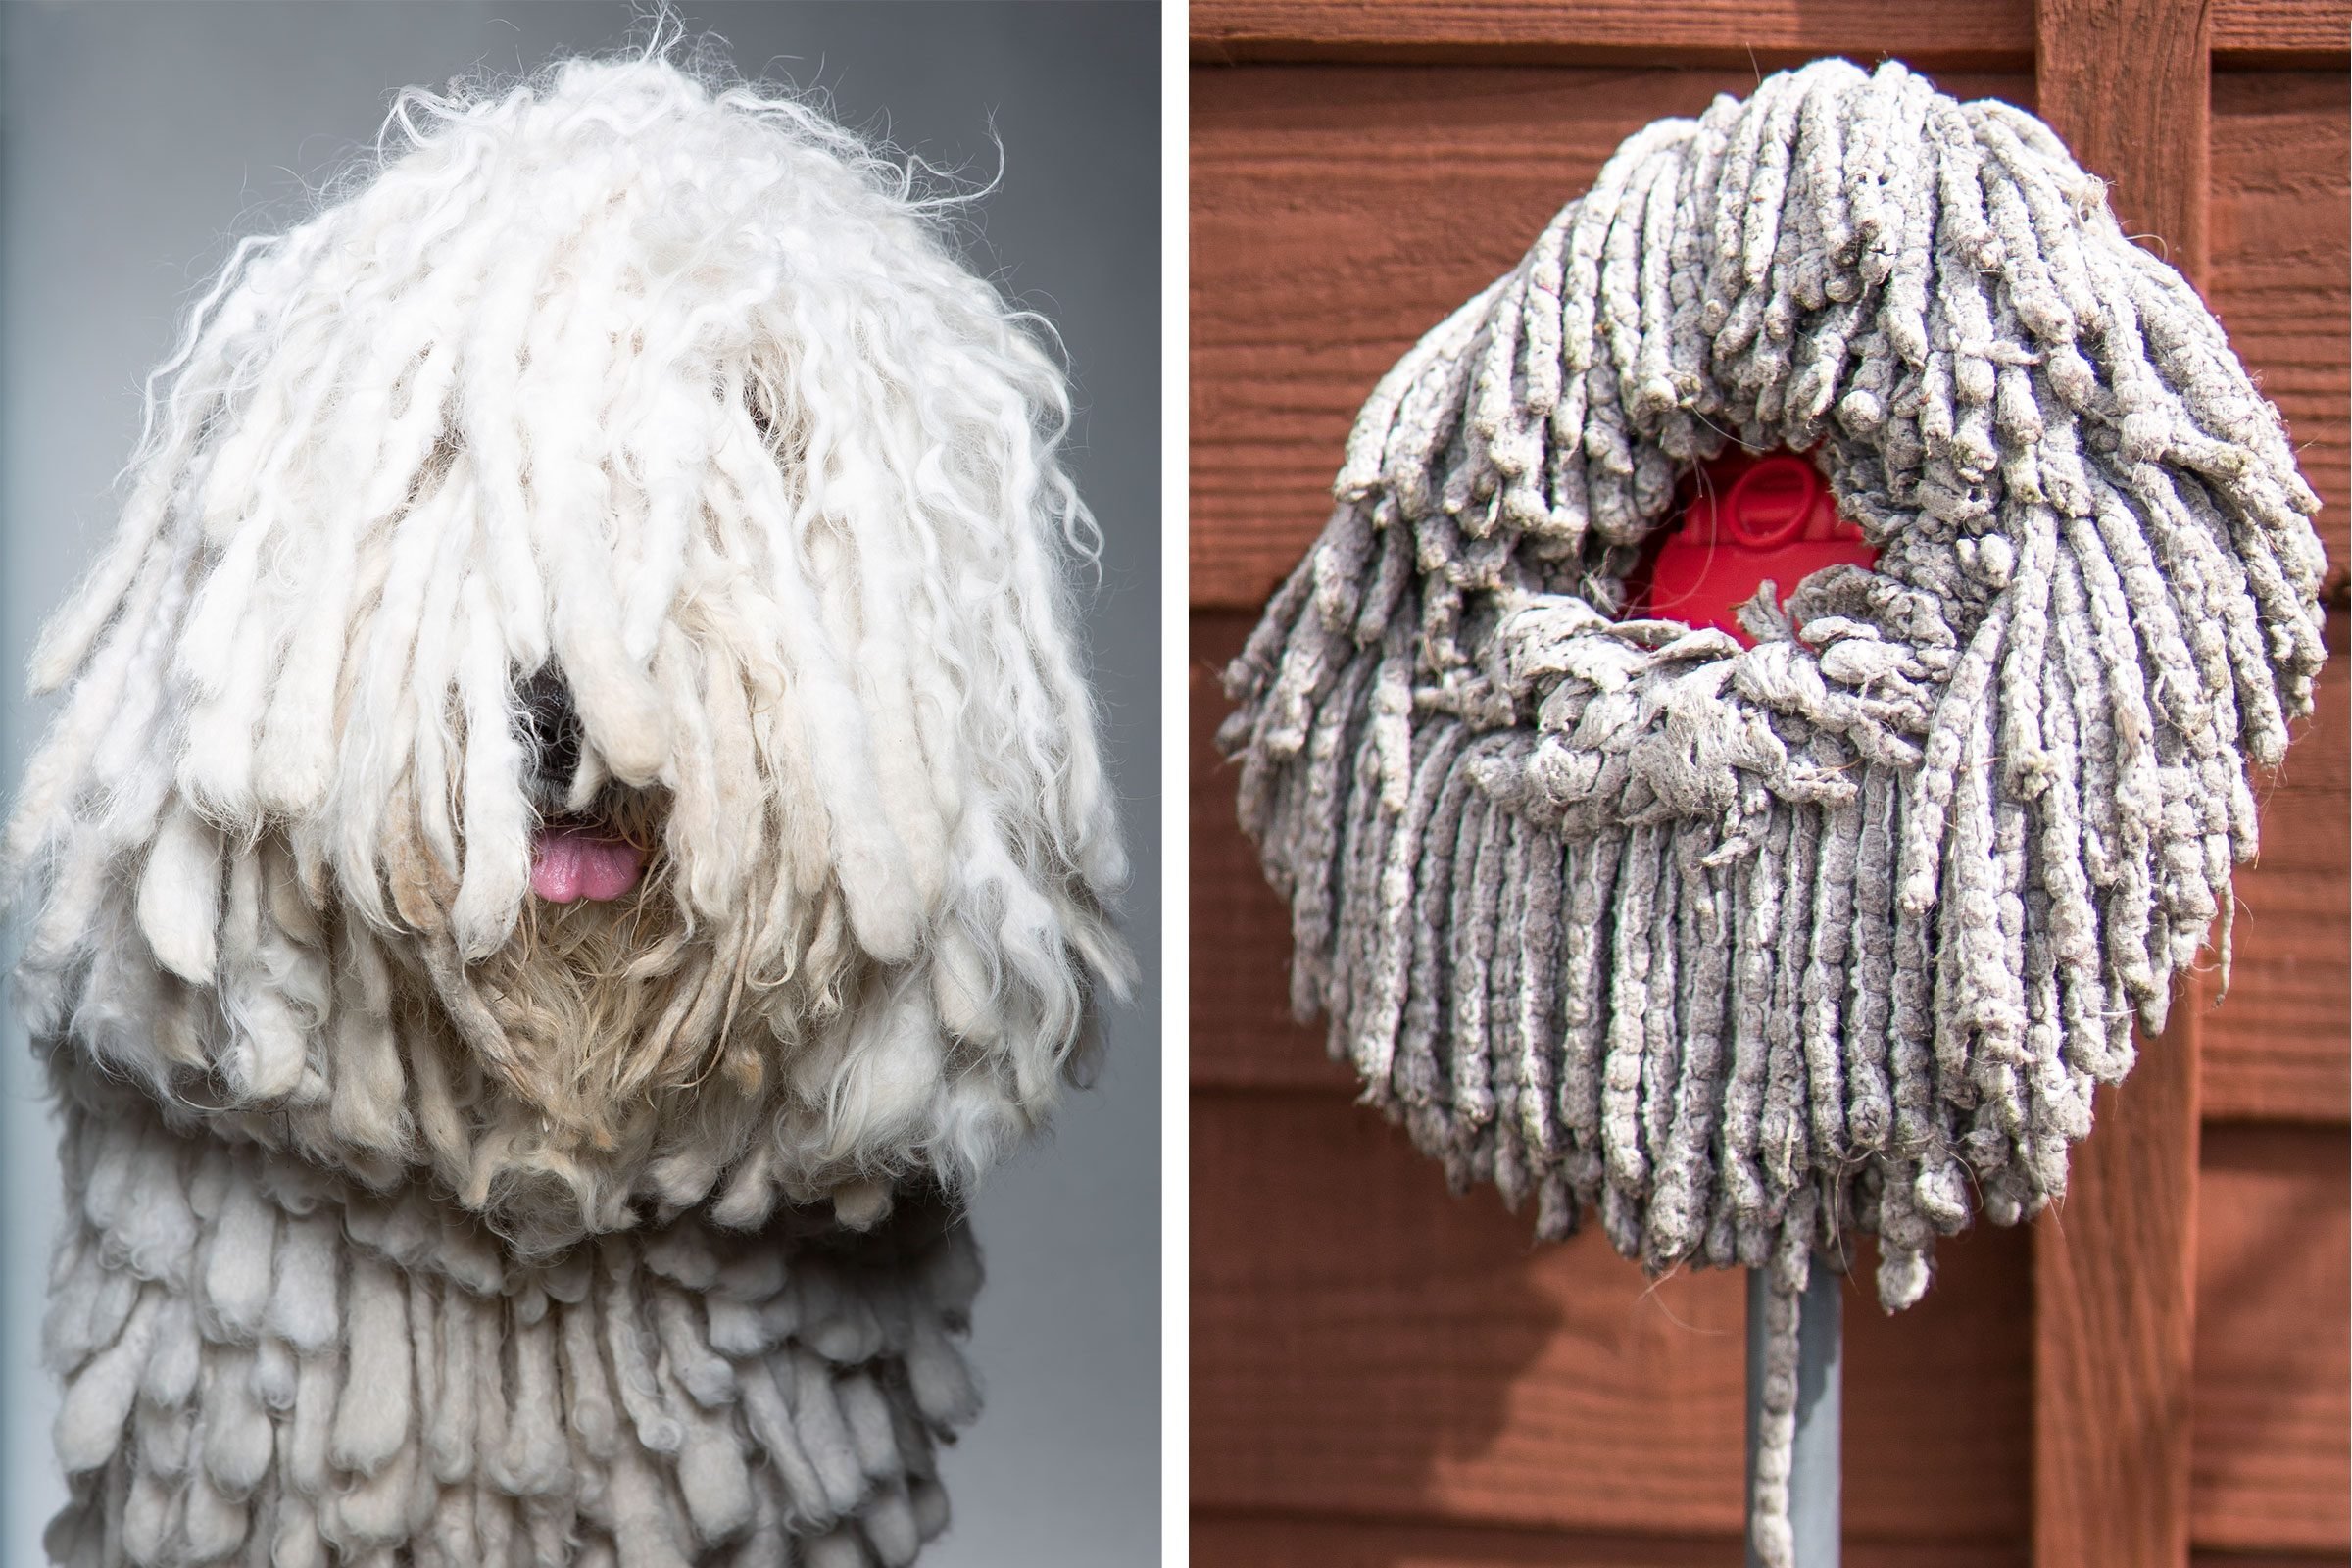 a portrait of a dog compared to a portrait of a mop